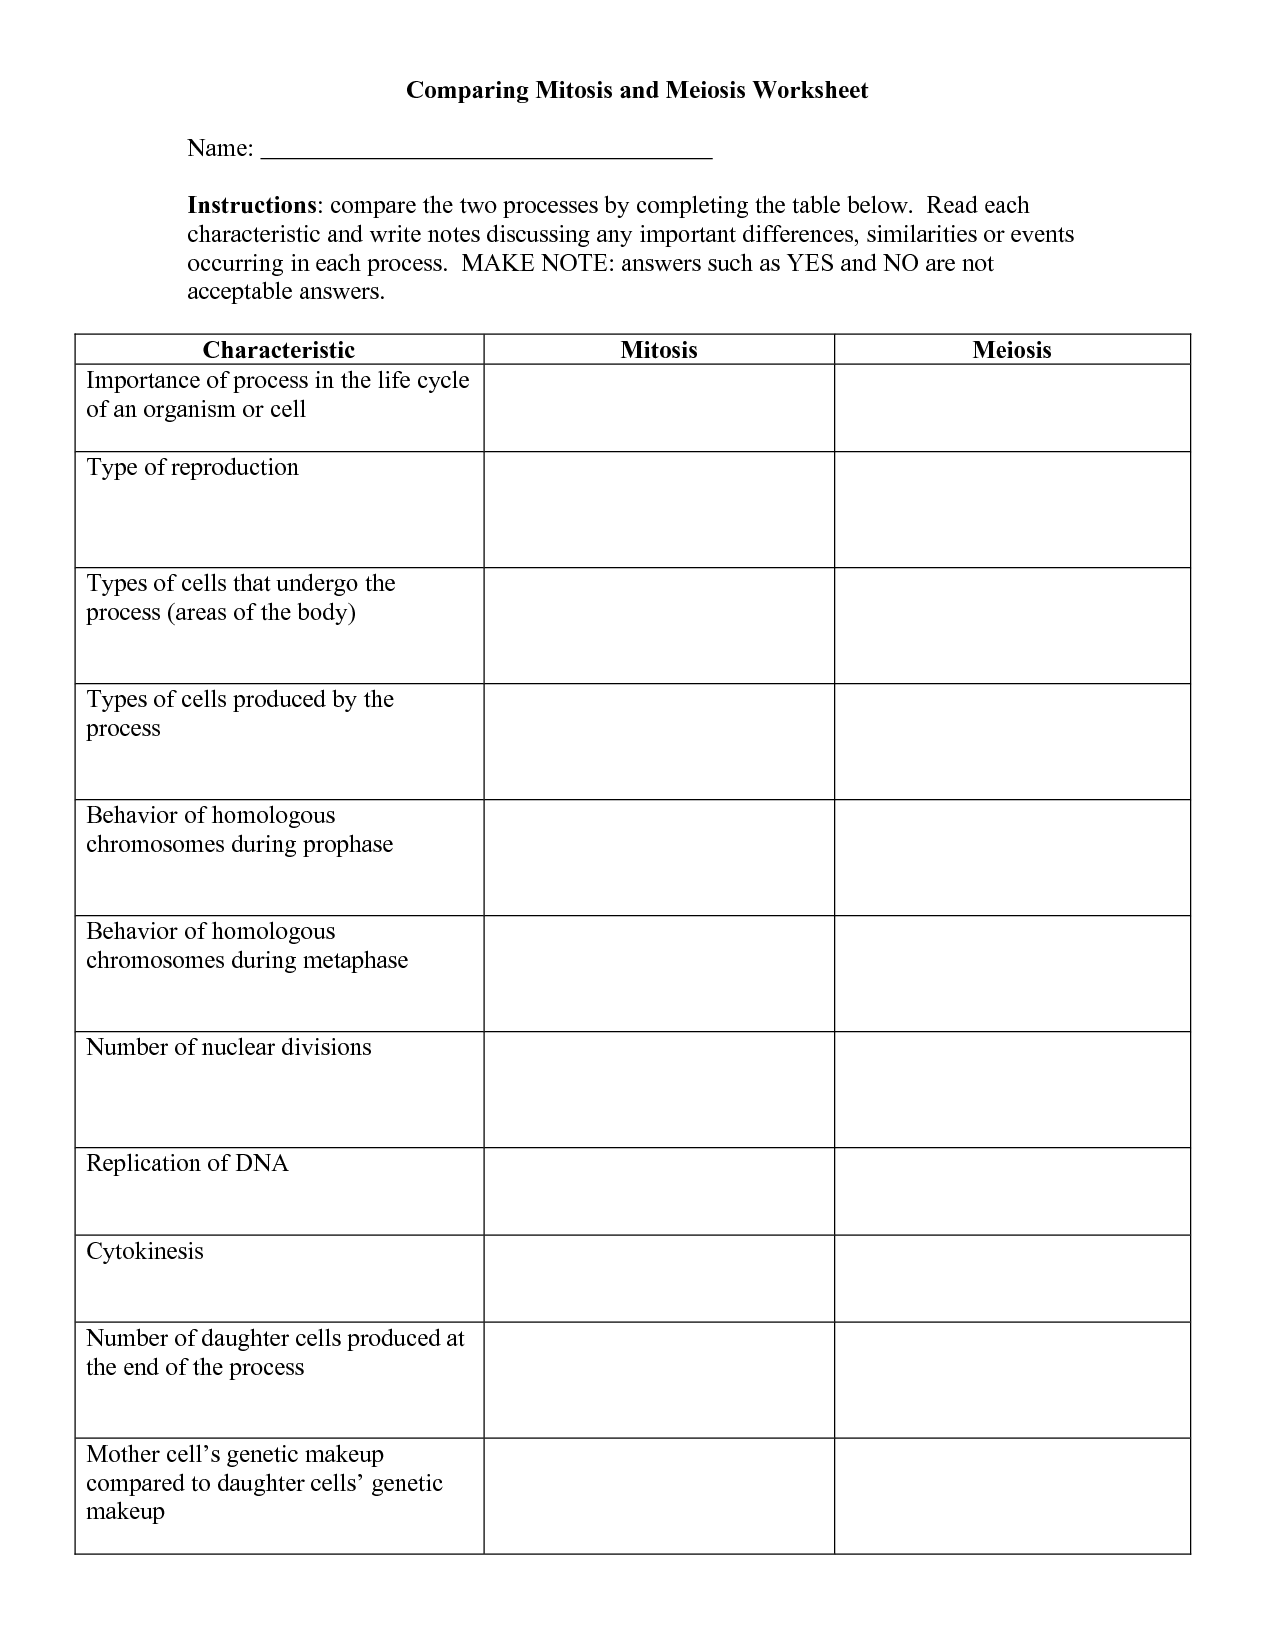 12-best-images-of-cell-division-worksheet-mitosis-notes-worksheet-answers-mitosis-worksheet